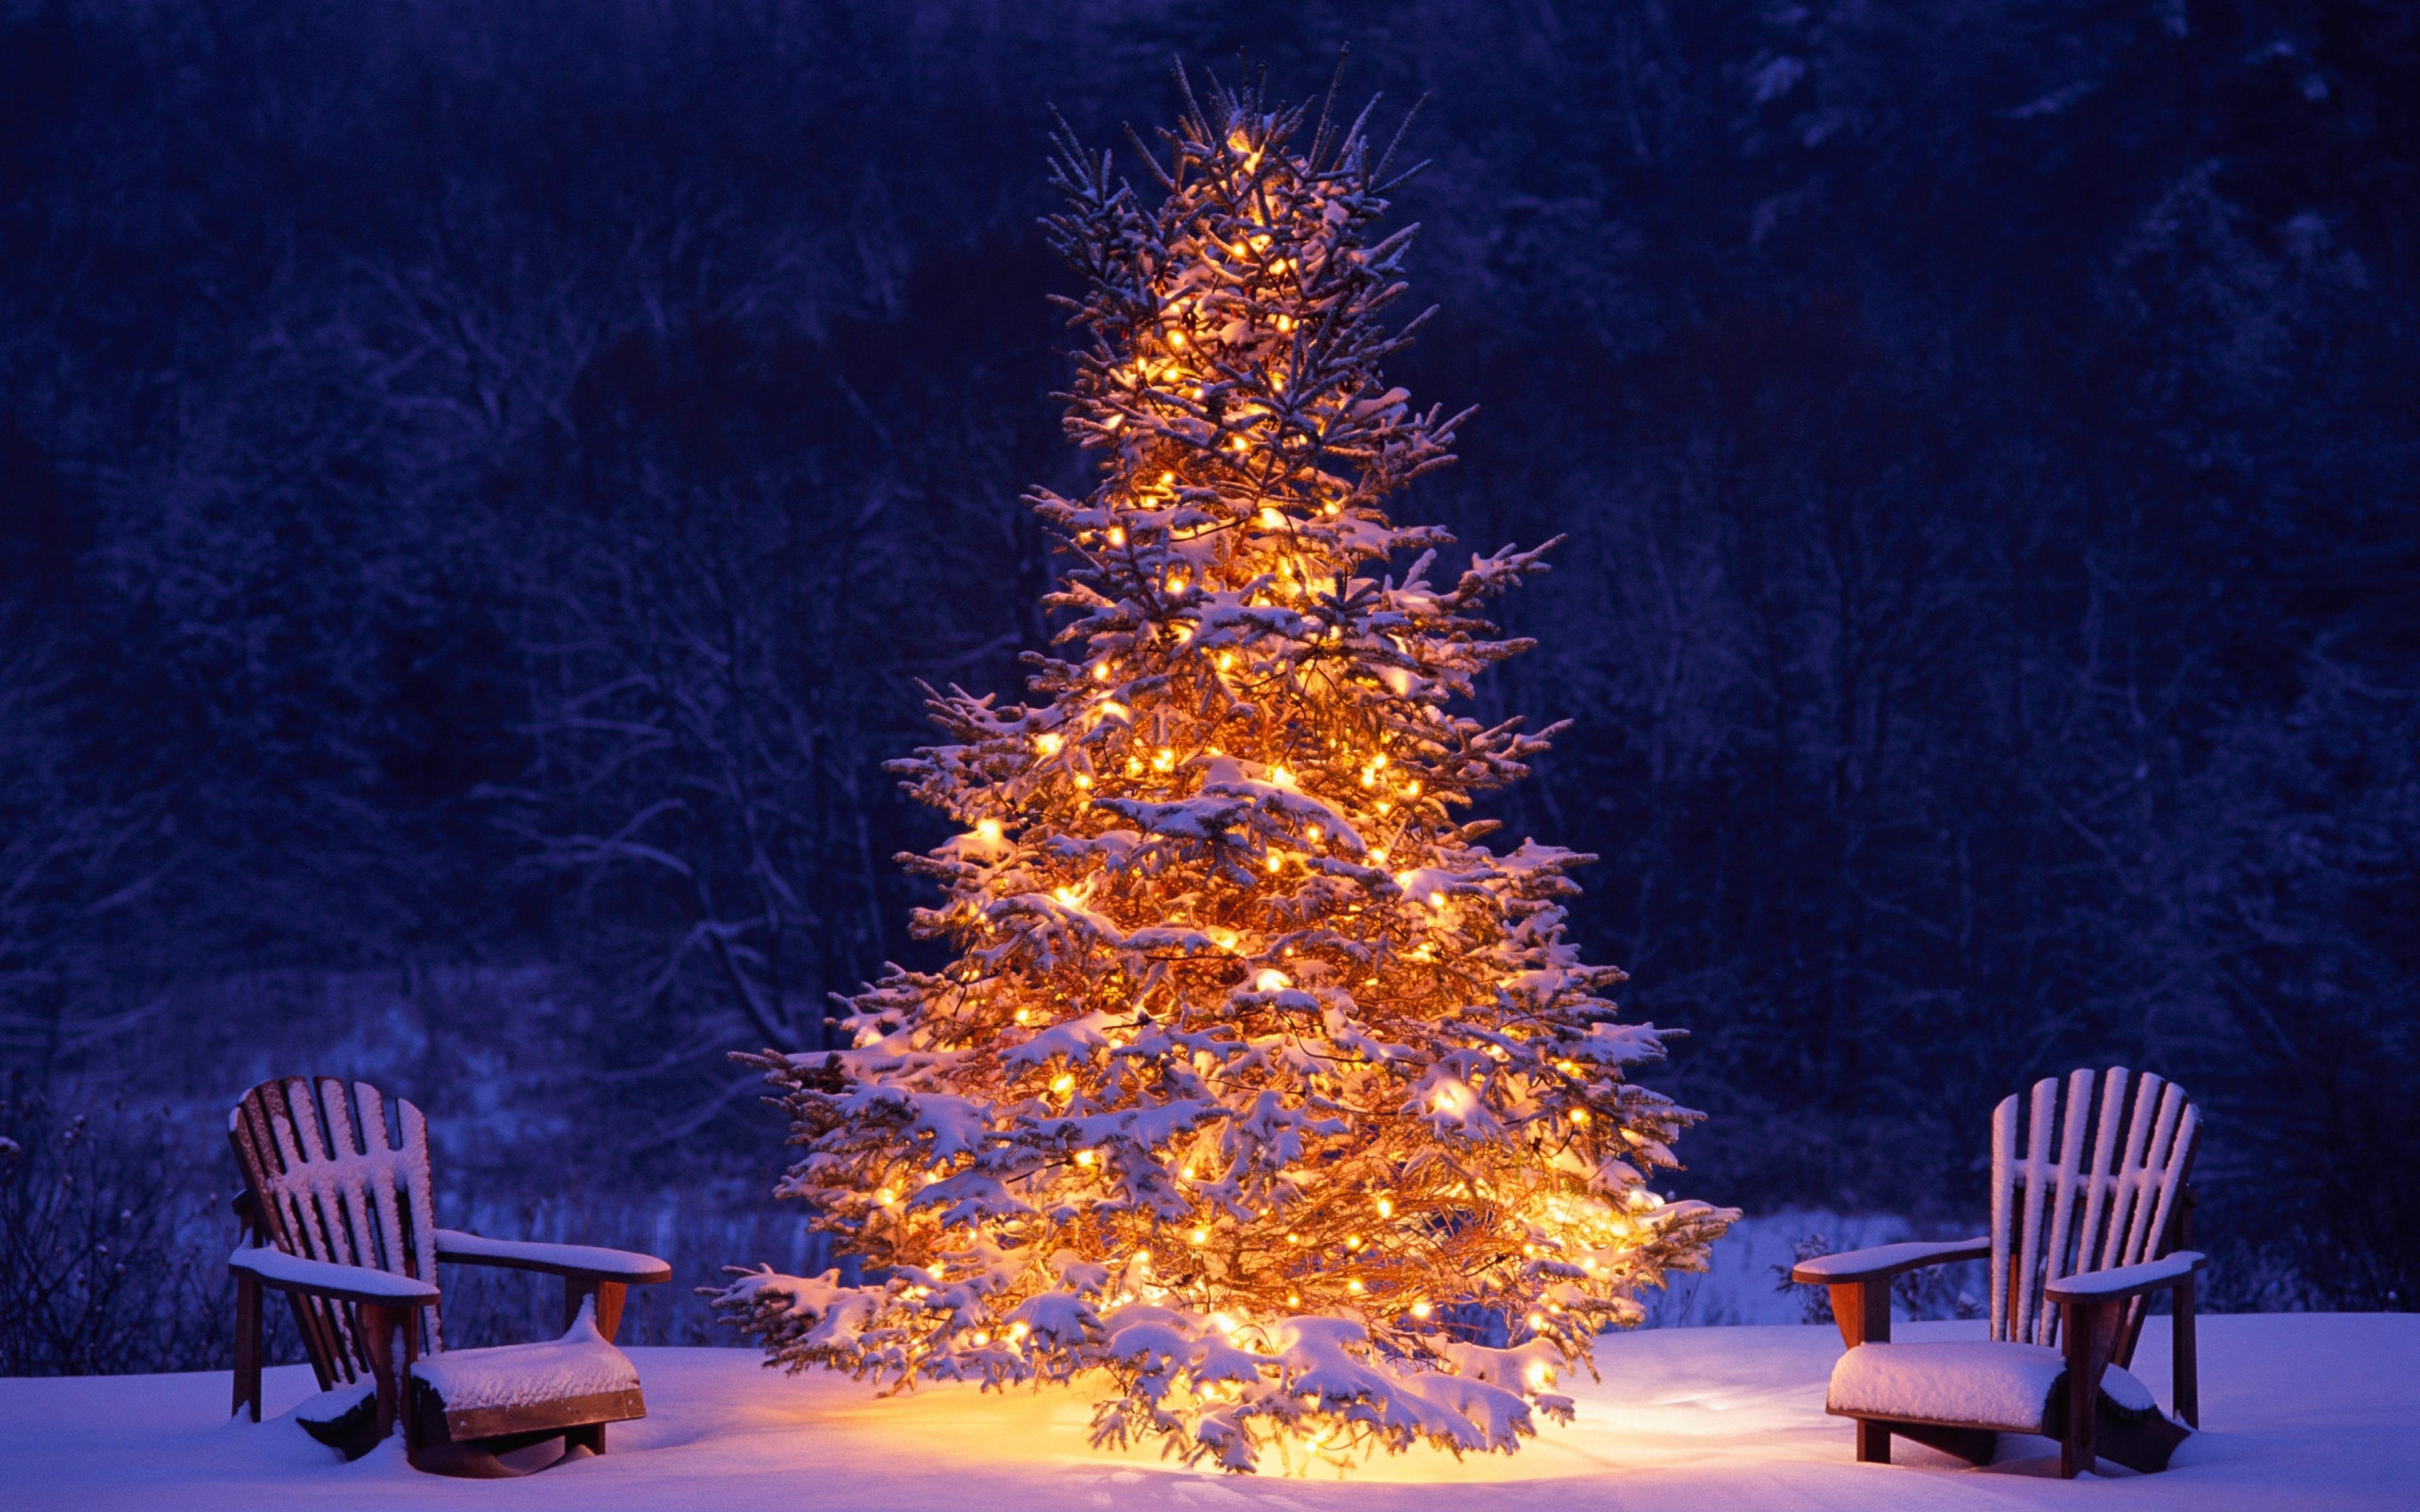 Download 3840x2400 wallpaper christmas tree, chairs, winter